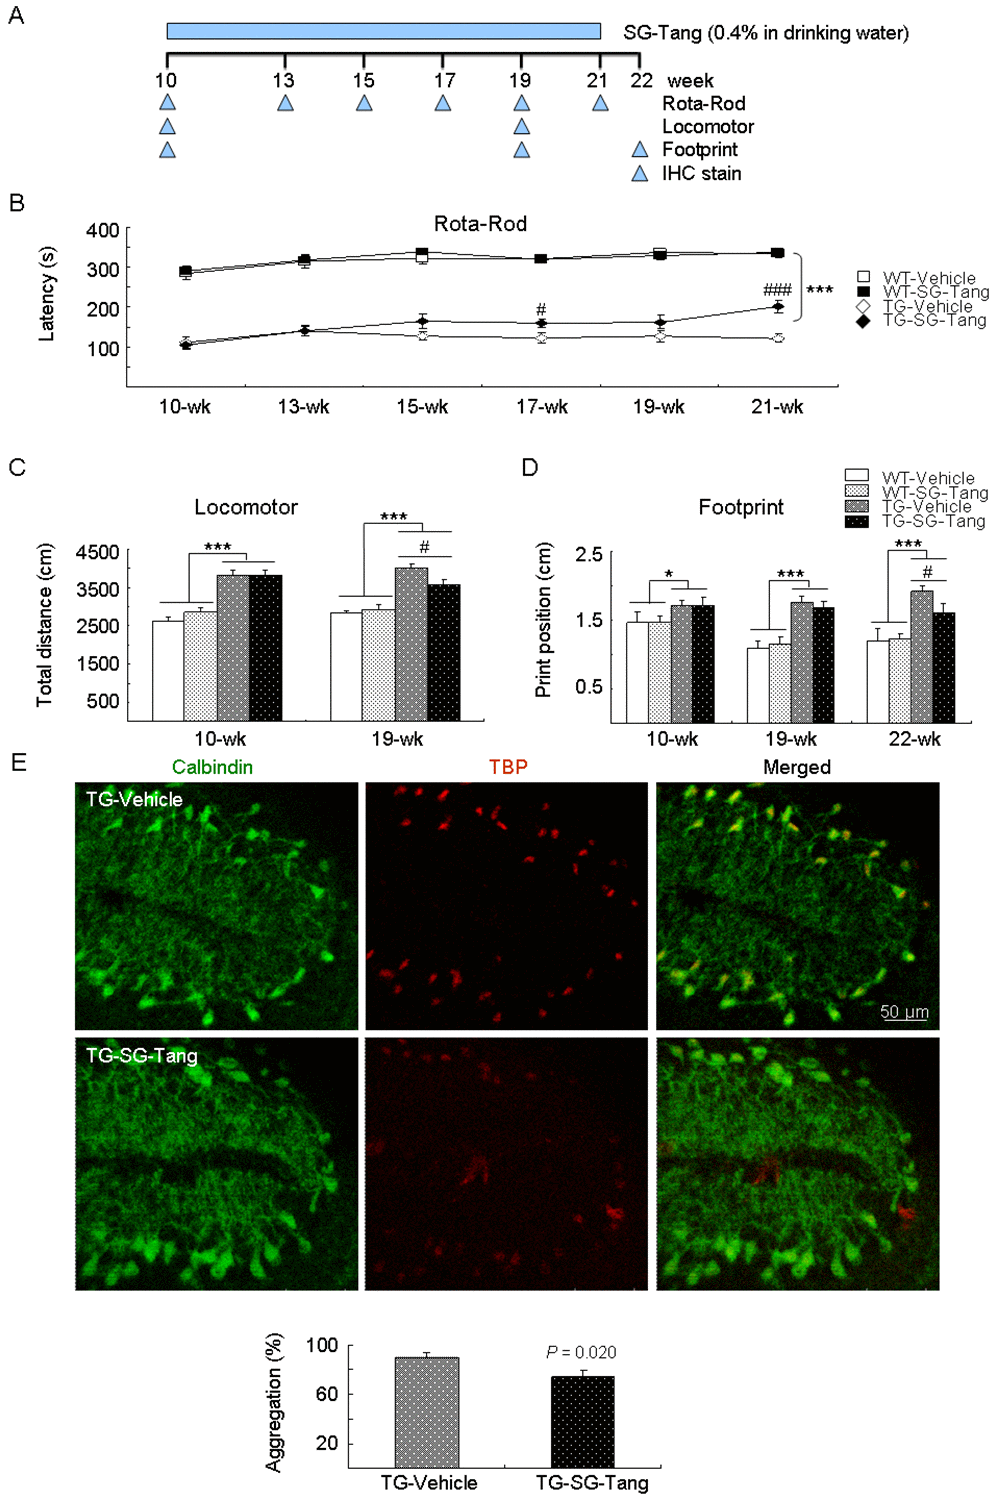 Neuroprotective effect of SG-Tang in SCA17 mice. (A) Experimental timeline. Mice received vehicle or SG-Tang (0.4% in drinking water) from 10 to 21 weeks old. Behavioral analyses were performed during (rotarod task) as well as at the beginning and the end (locomotor and footprint tasks) of the period to evaluate the treatment effect. In addition, IHC staining with 1TBP18 was performed at week 22. (B) Rotarod performance of wild type (WT) and SCA 17 transgenic (TG) mice at weeks 10, 13, 15, 17, 19, and 21 (n = 15; #: P ### or ***: P C) Locomotor analysis of WT and SCA 17 TG mice at weeks 10 and 19 (n = 16; #: P P D) Footprint analysis of WT and SCA 17 TG mice at weeks 10, 19, and 21 (n = 14; # or *: P P E) IHC staining of TBP aggregates (red) in calbindin-positive Purkinje cells (green) of SCA17 TG mice at week 22 (n = 3).